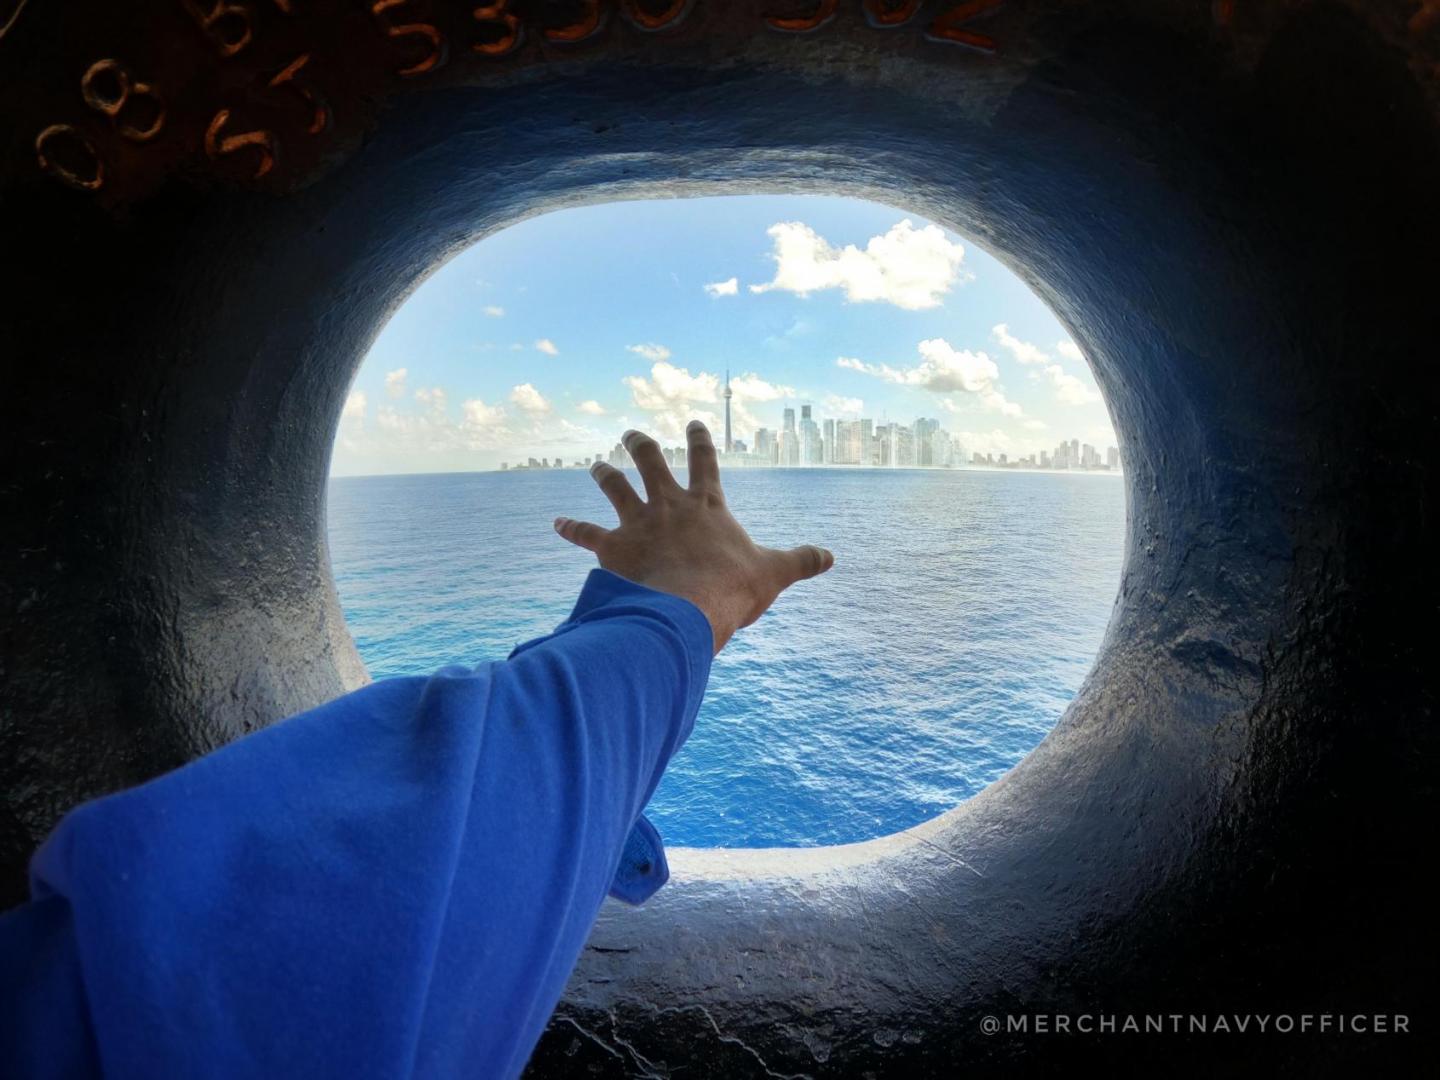 A sailor on board holds his hand out the porthole to reach for the shore and buildings